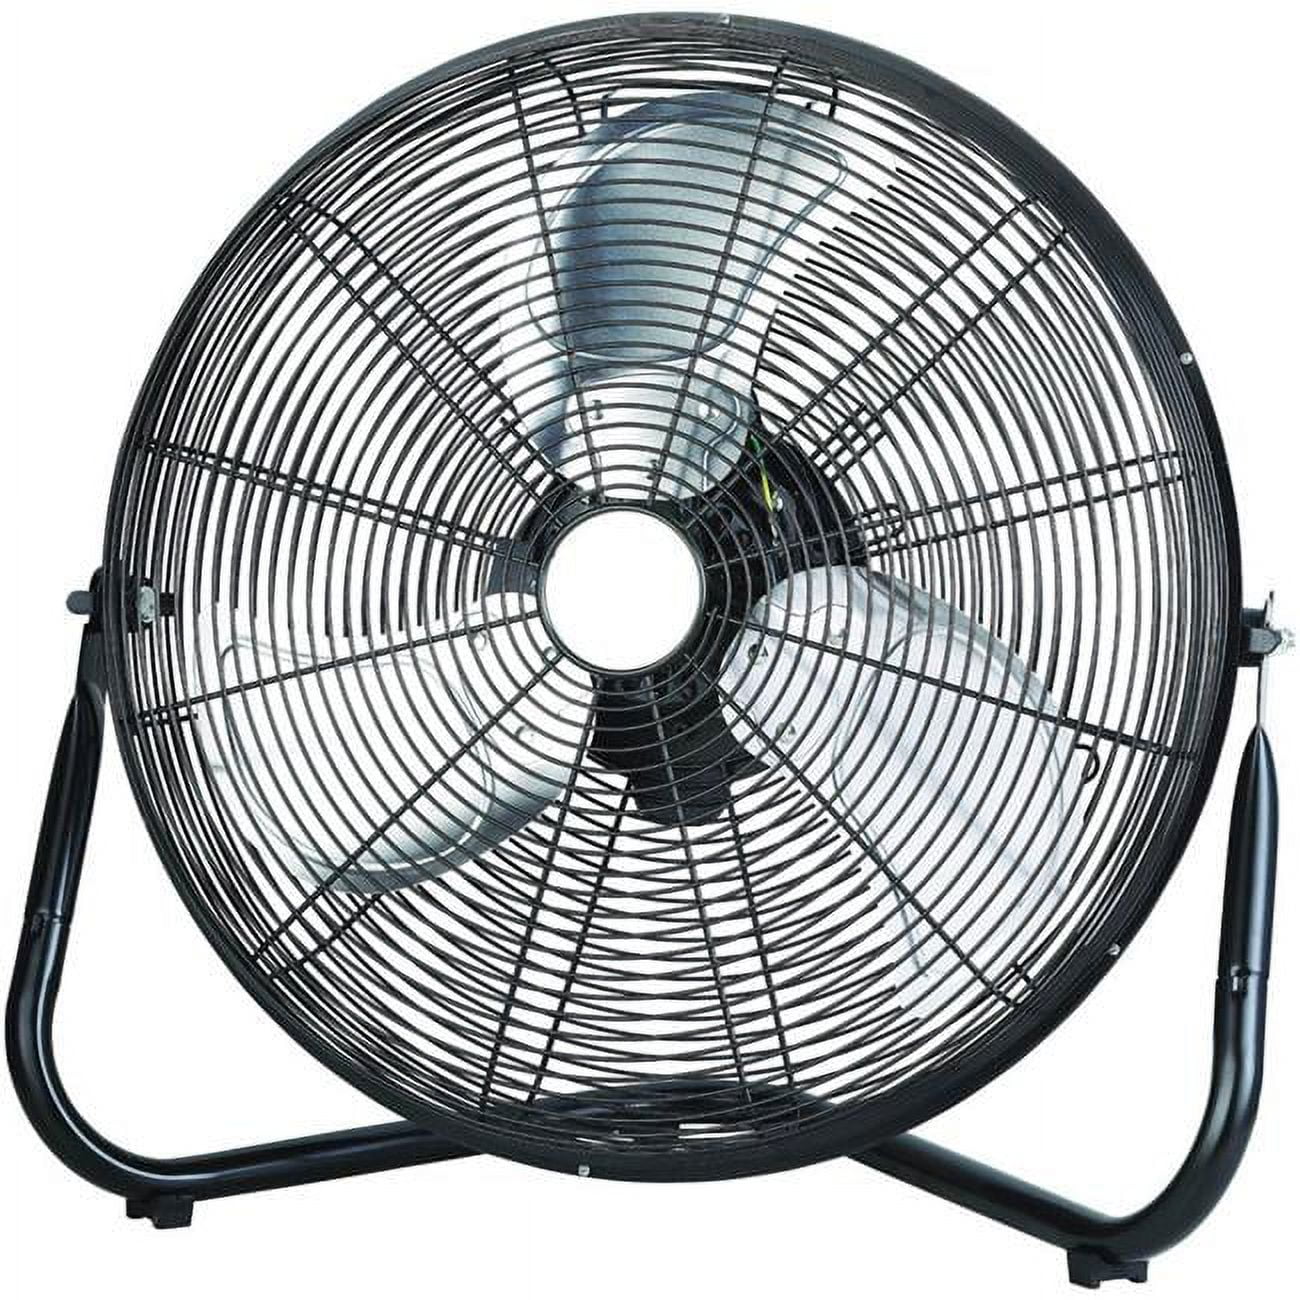 Lasko Products 6301337 22 x 22 x 7 in. High Velocity Fan 3-Speed AC Blade, Assorted